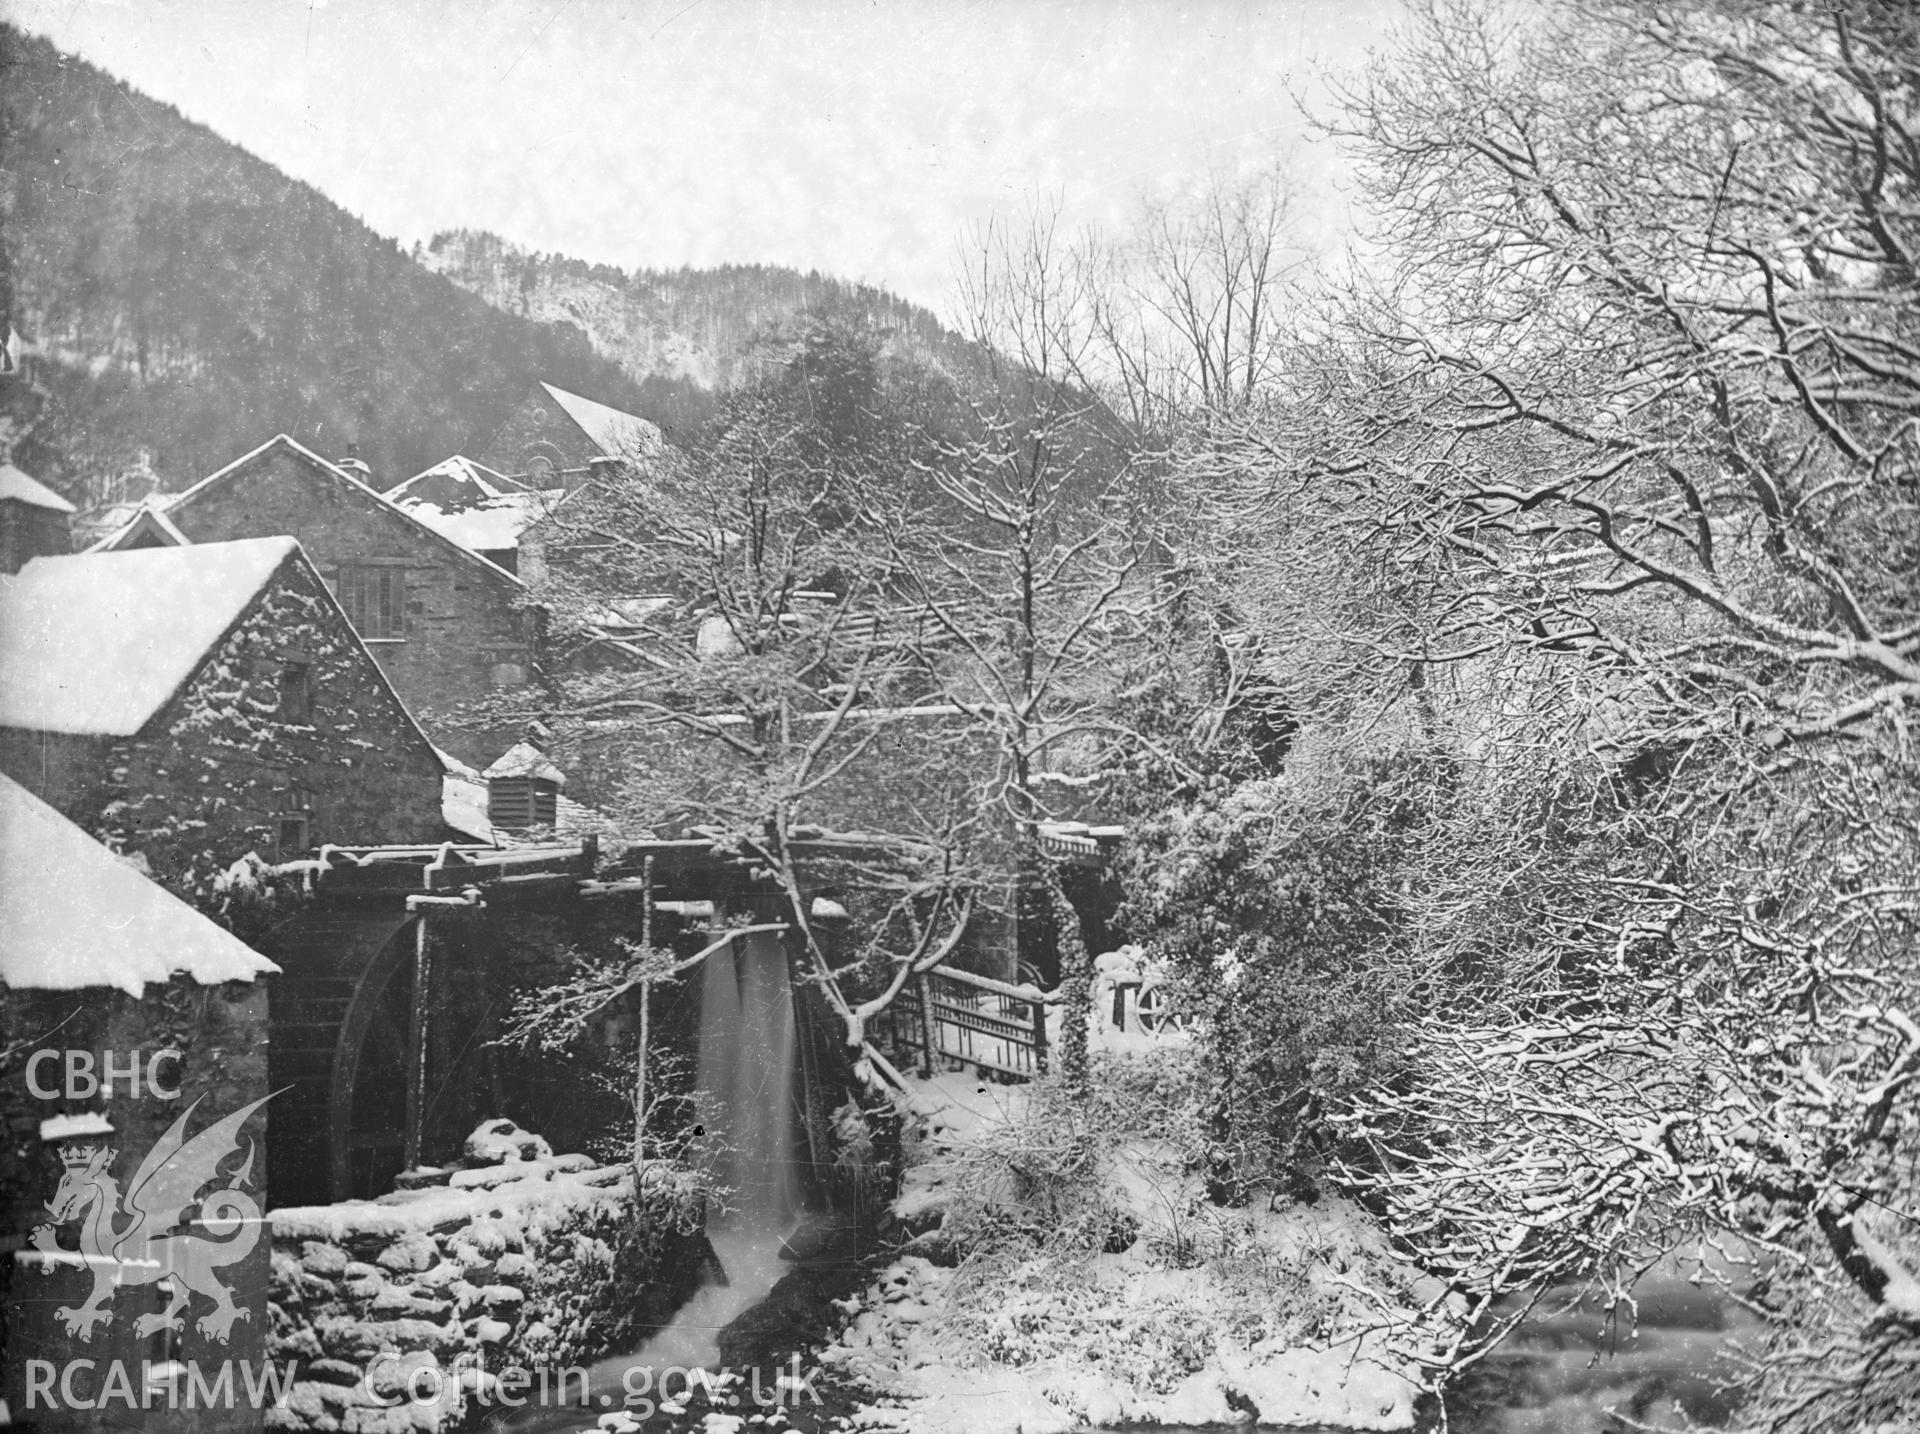 Digital copy of a glass plate showing view of mill in the Fairy Glen at Trefriw, taken by Manchester-based amateur photographer A. Rothwell, 1890-1910